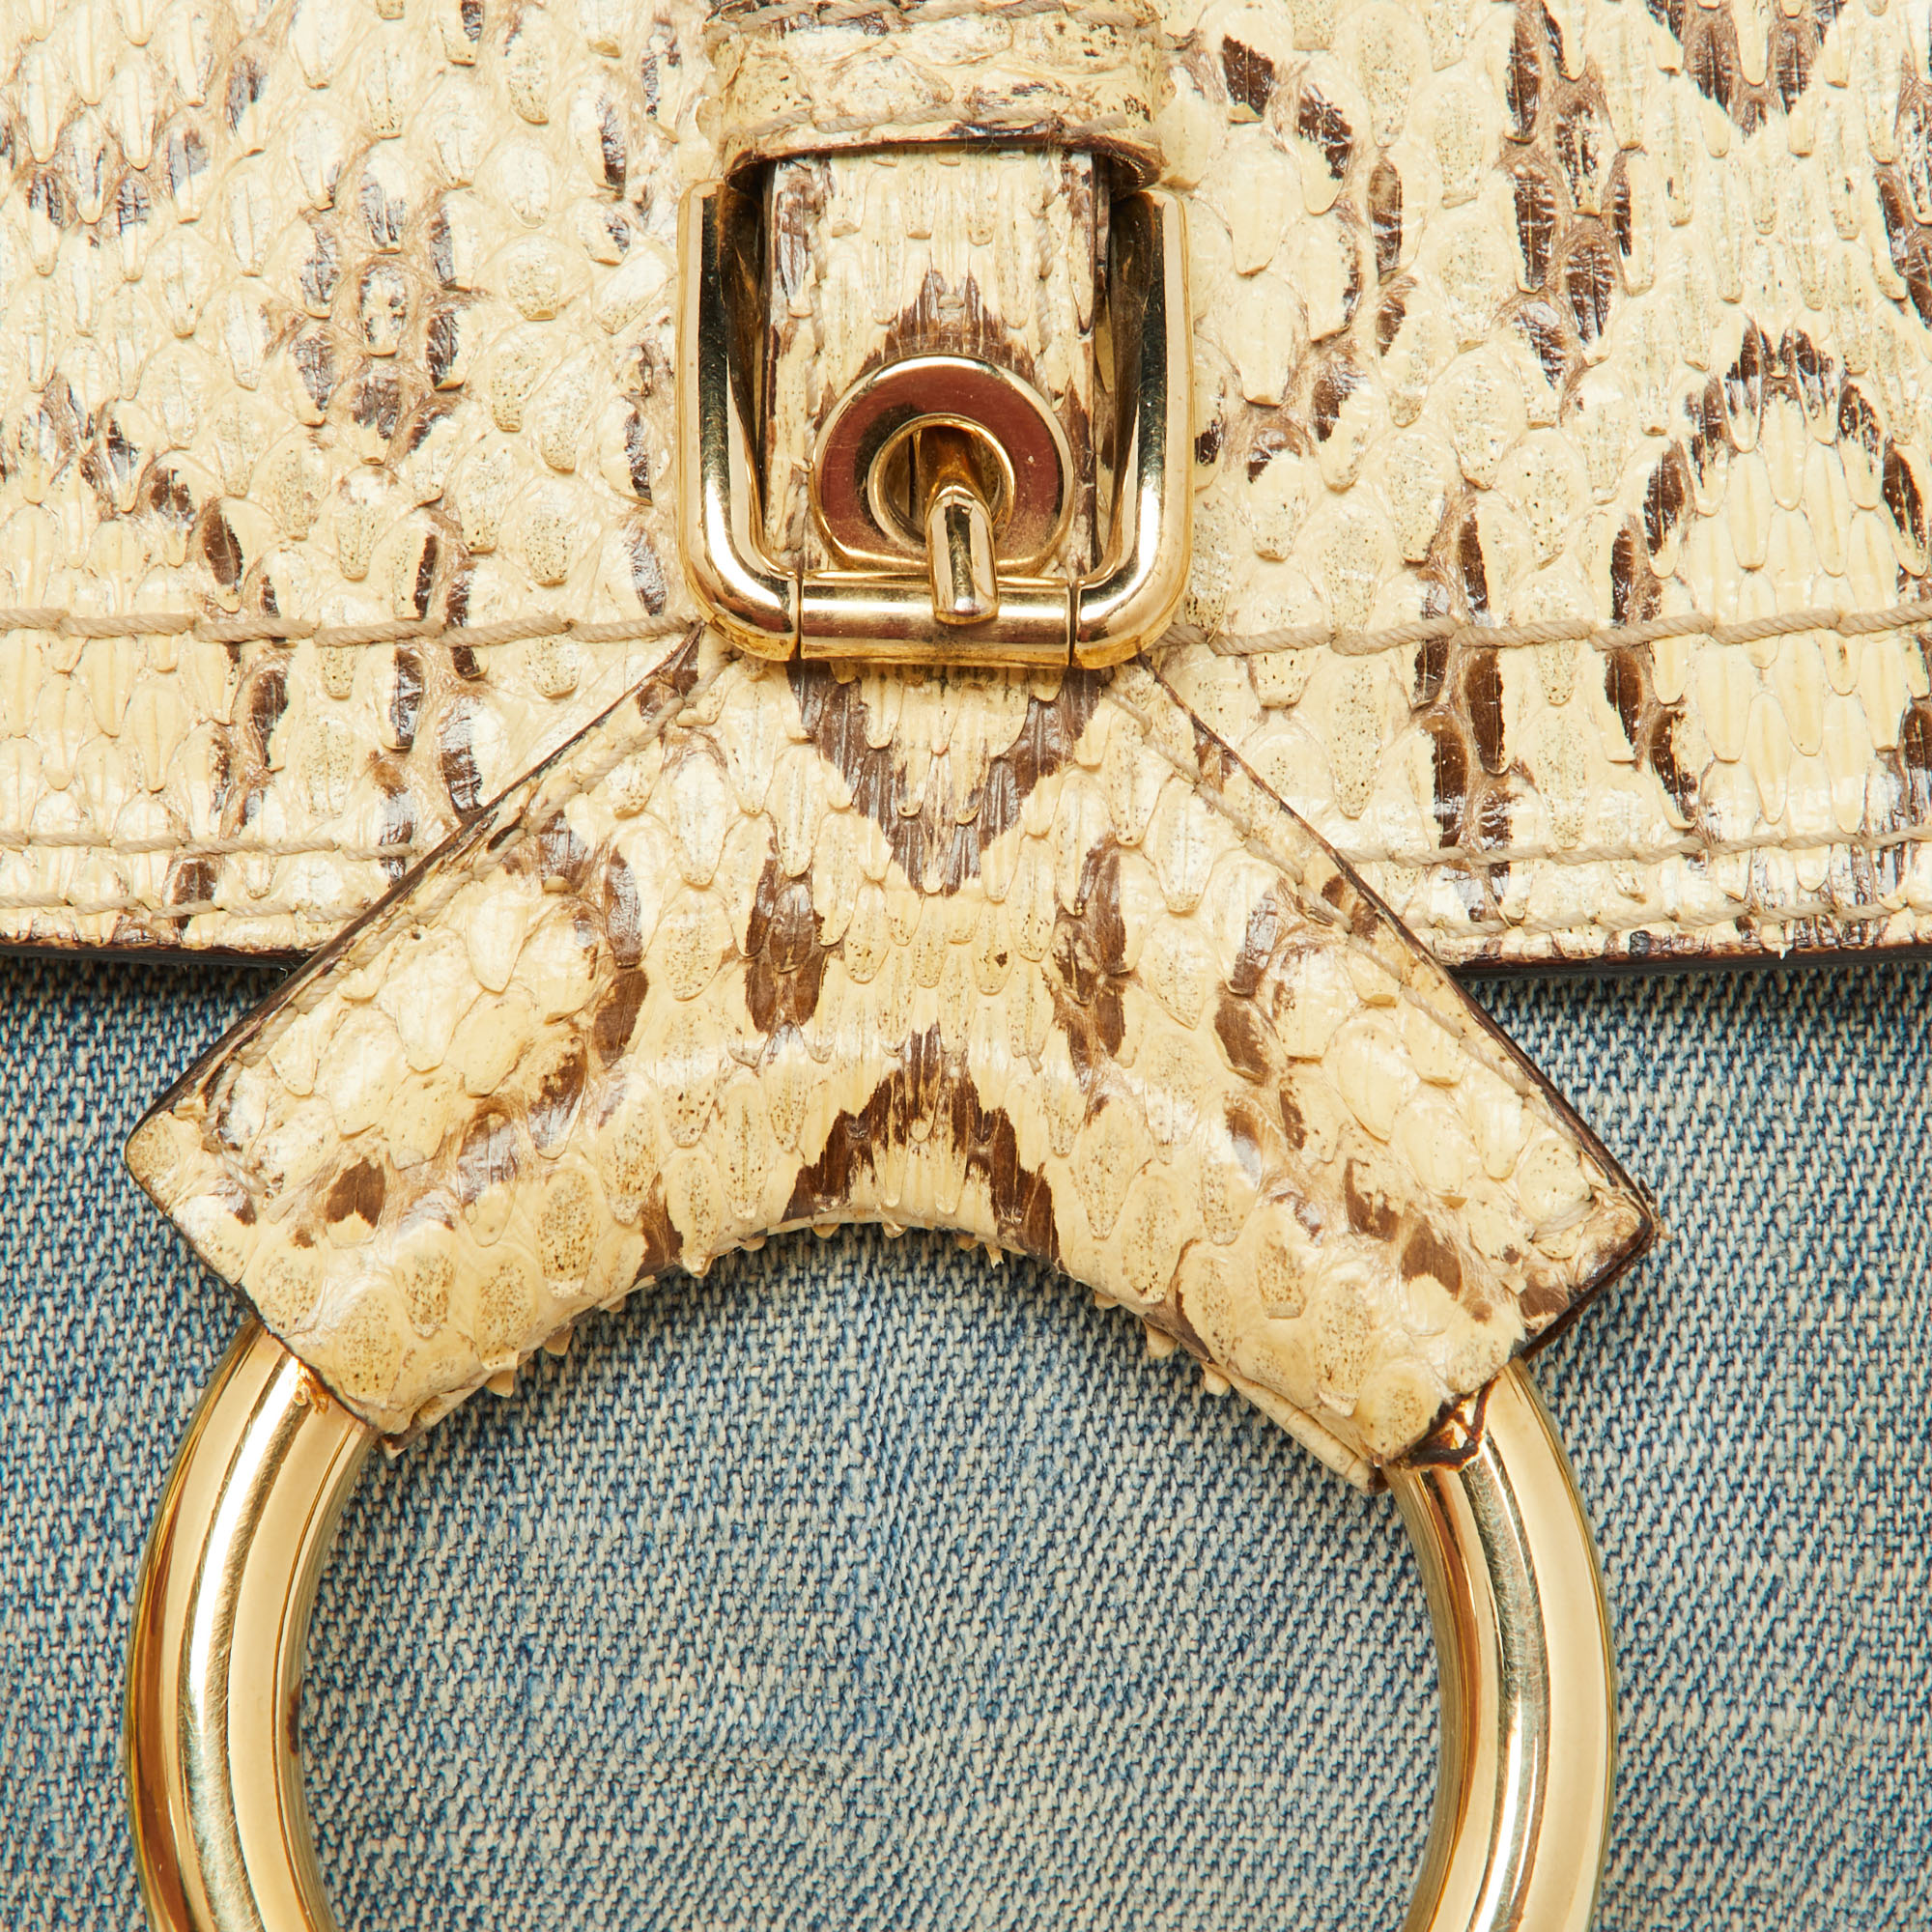 Dolce & Gabbana Cream/Blue Denim And Watersnake Leather Ring Buckle Flap Baguette Bag